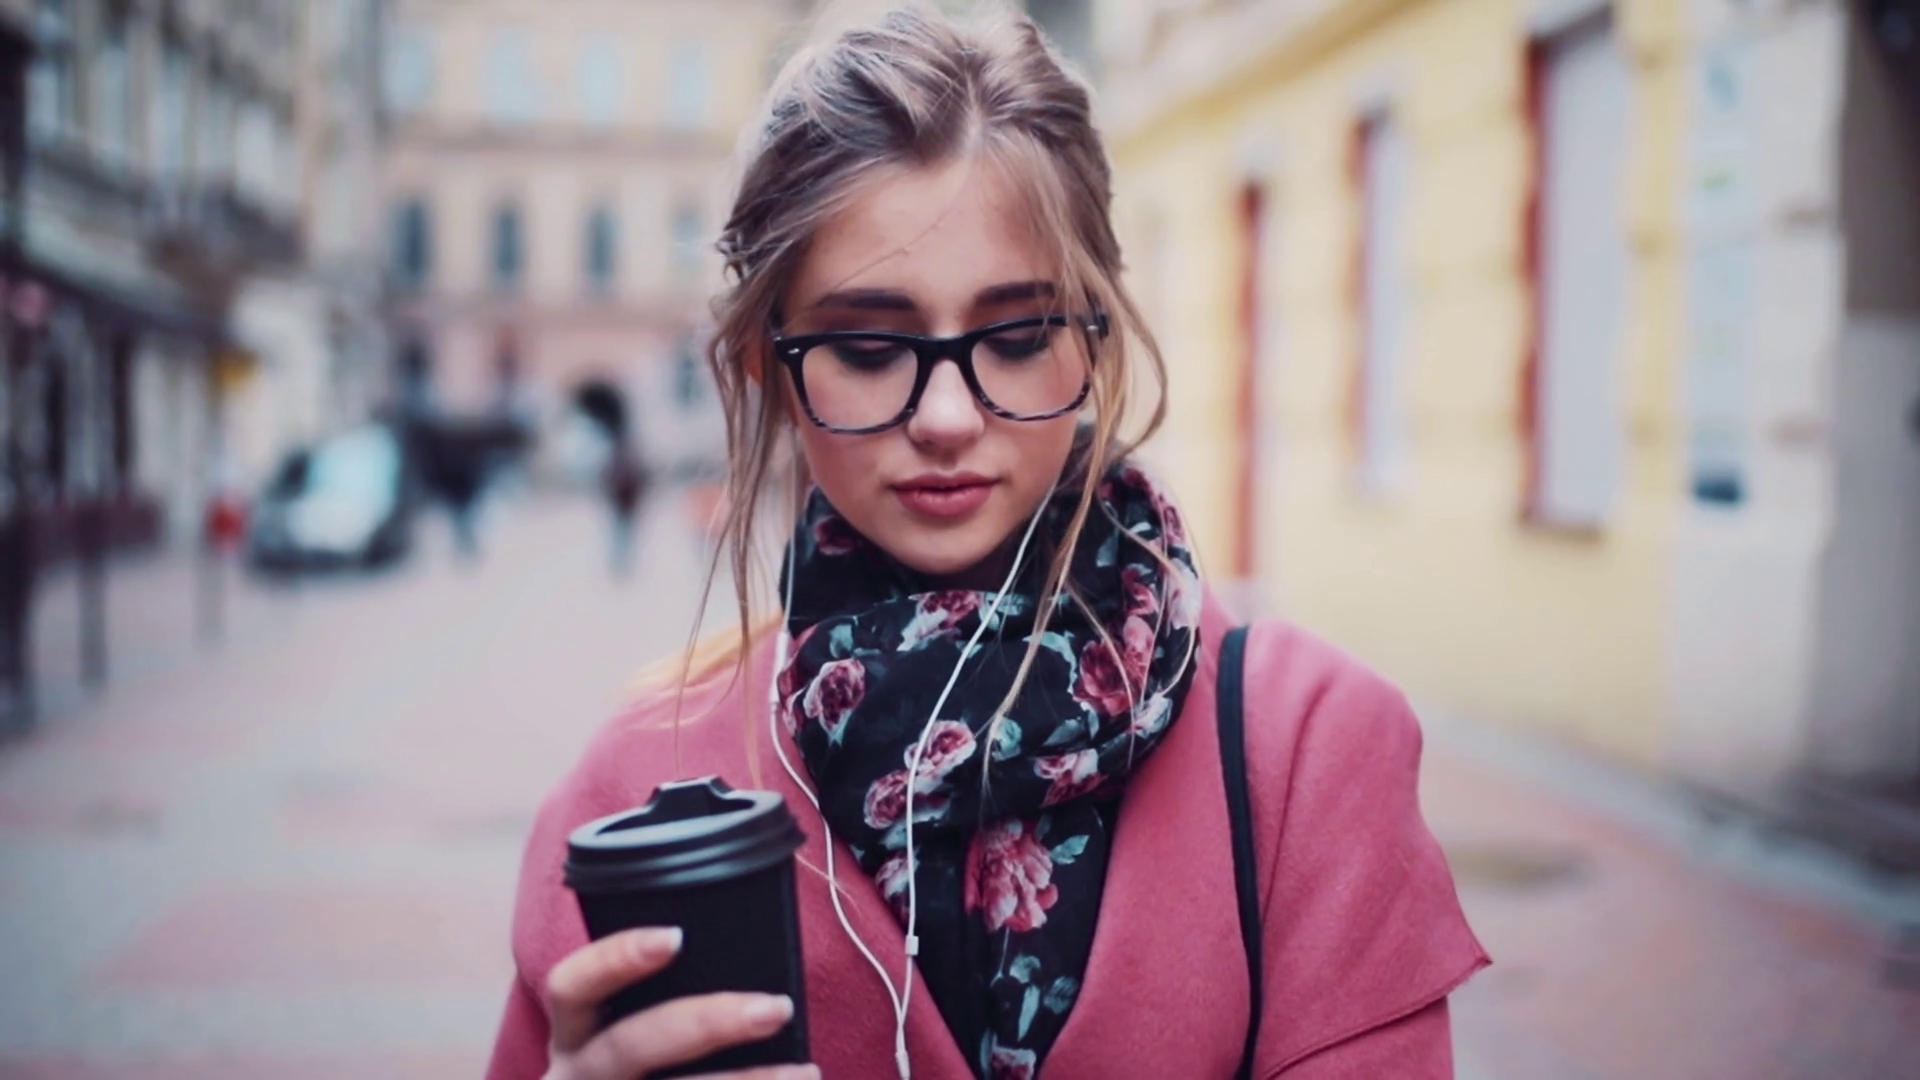 Girl with glasses photo